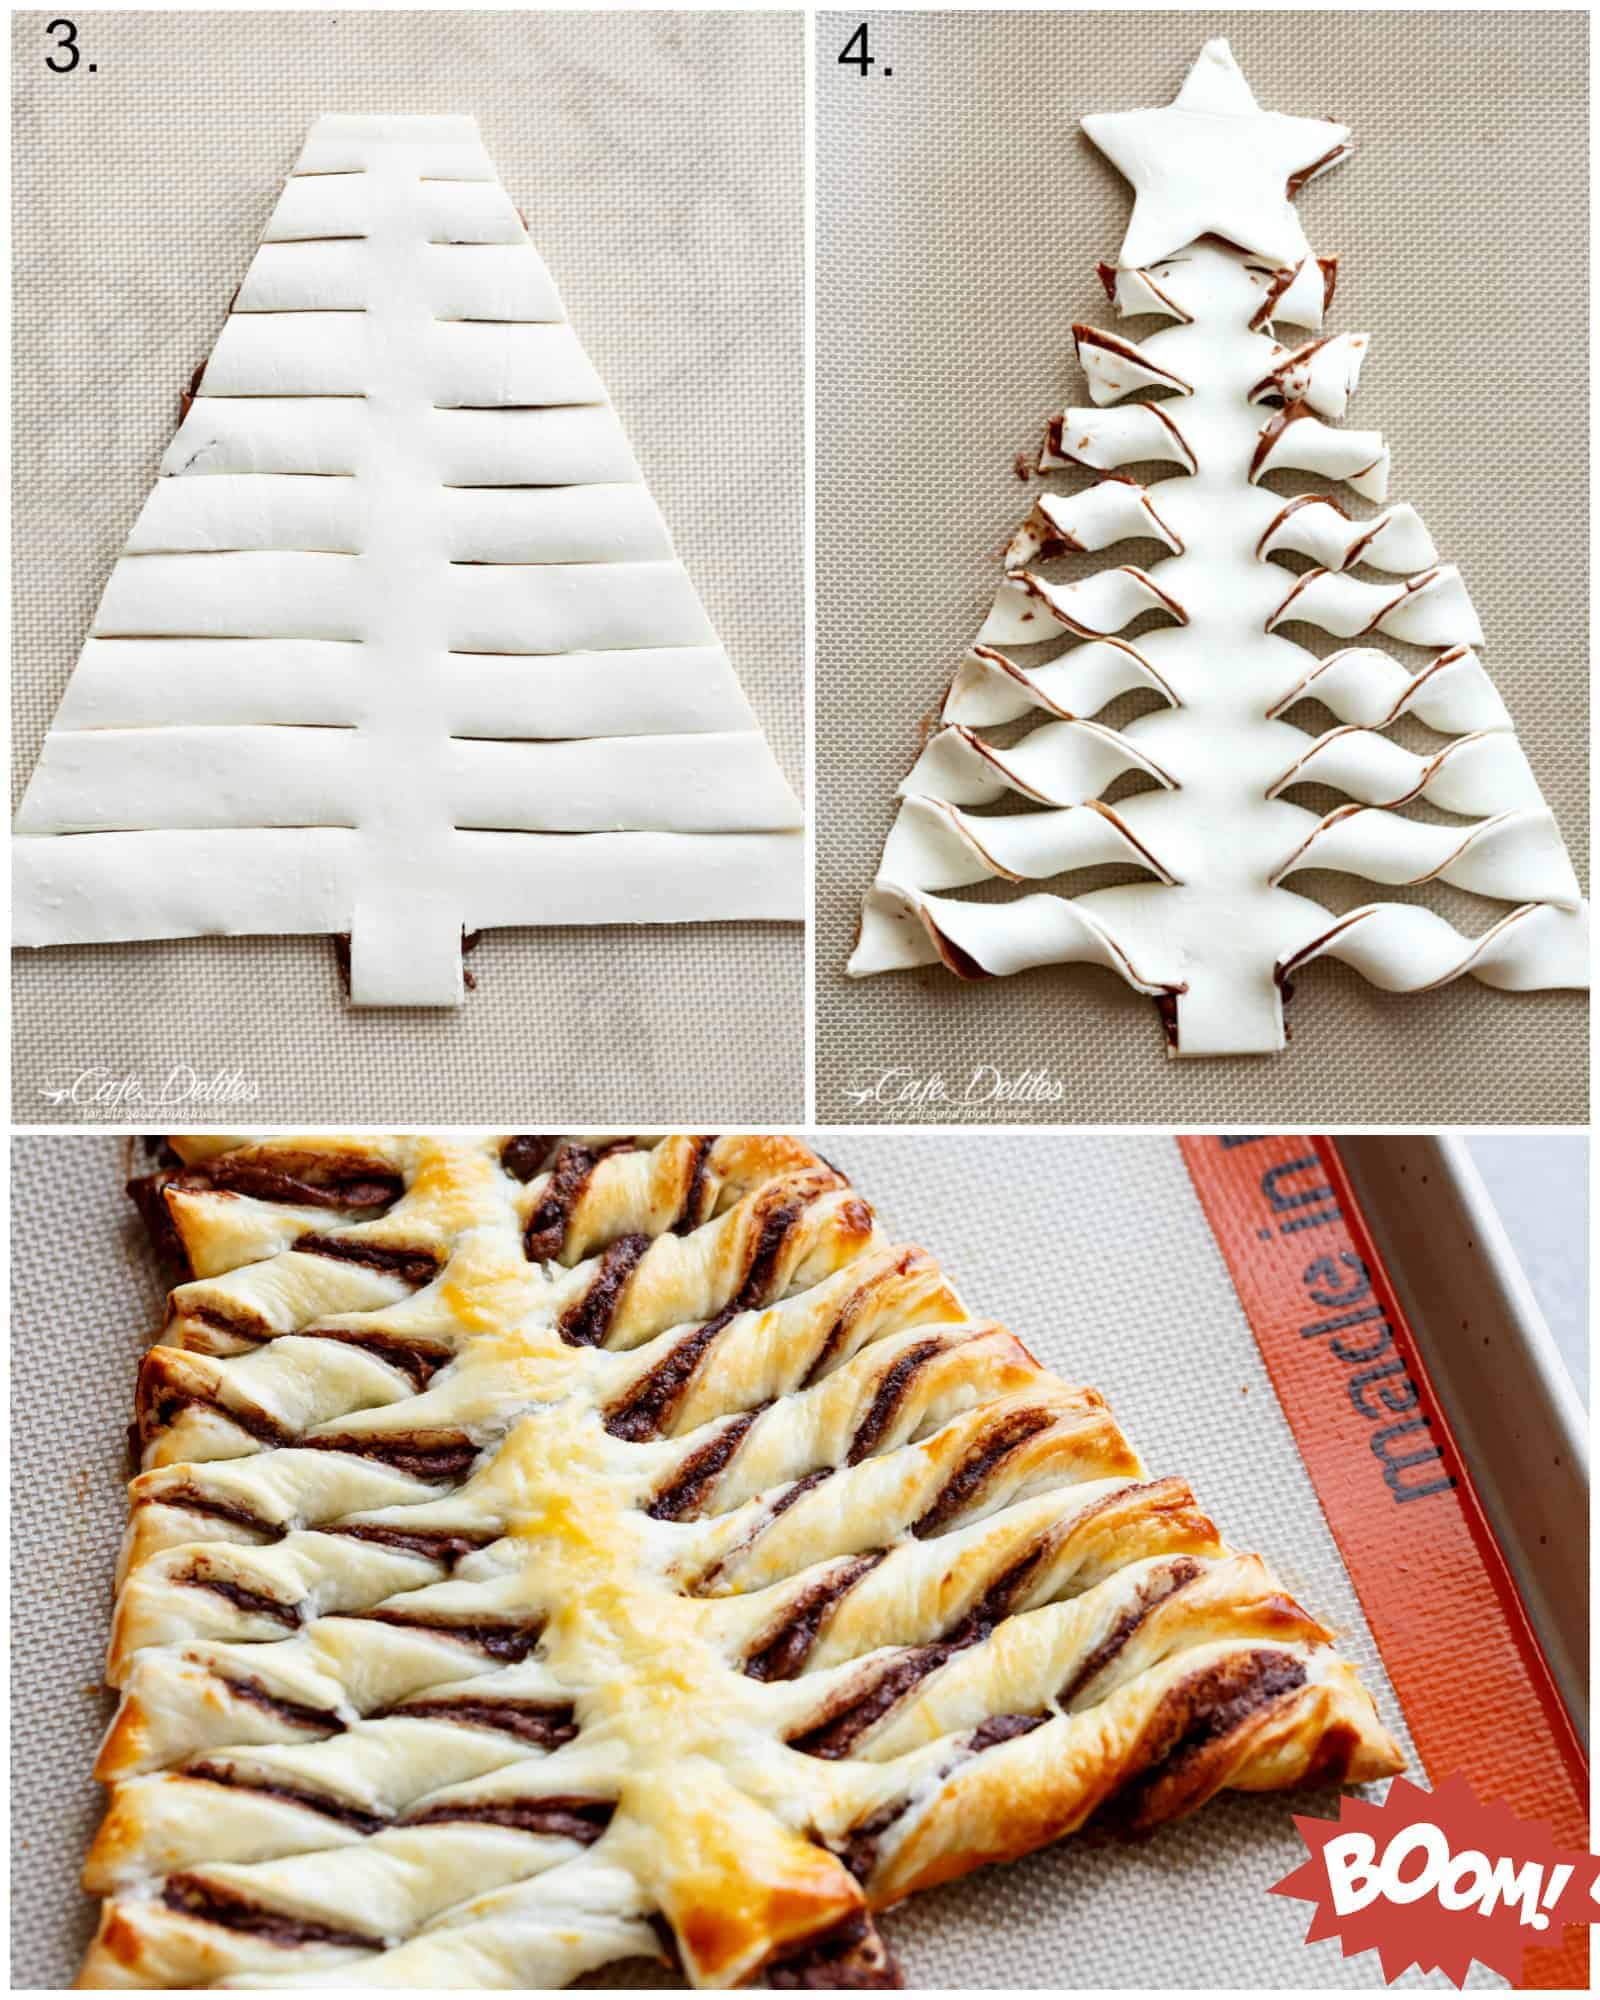 How To Make a Nutella Christmas Tree with Puff Pastry | cafedelites.com